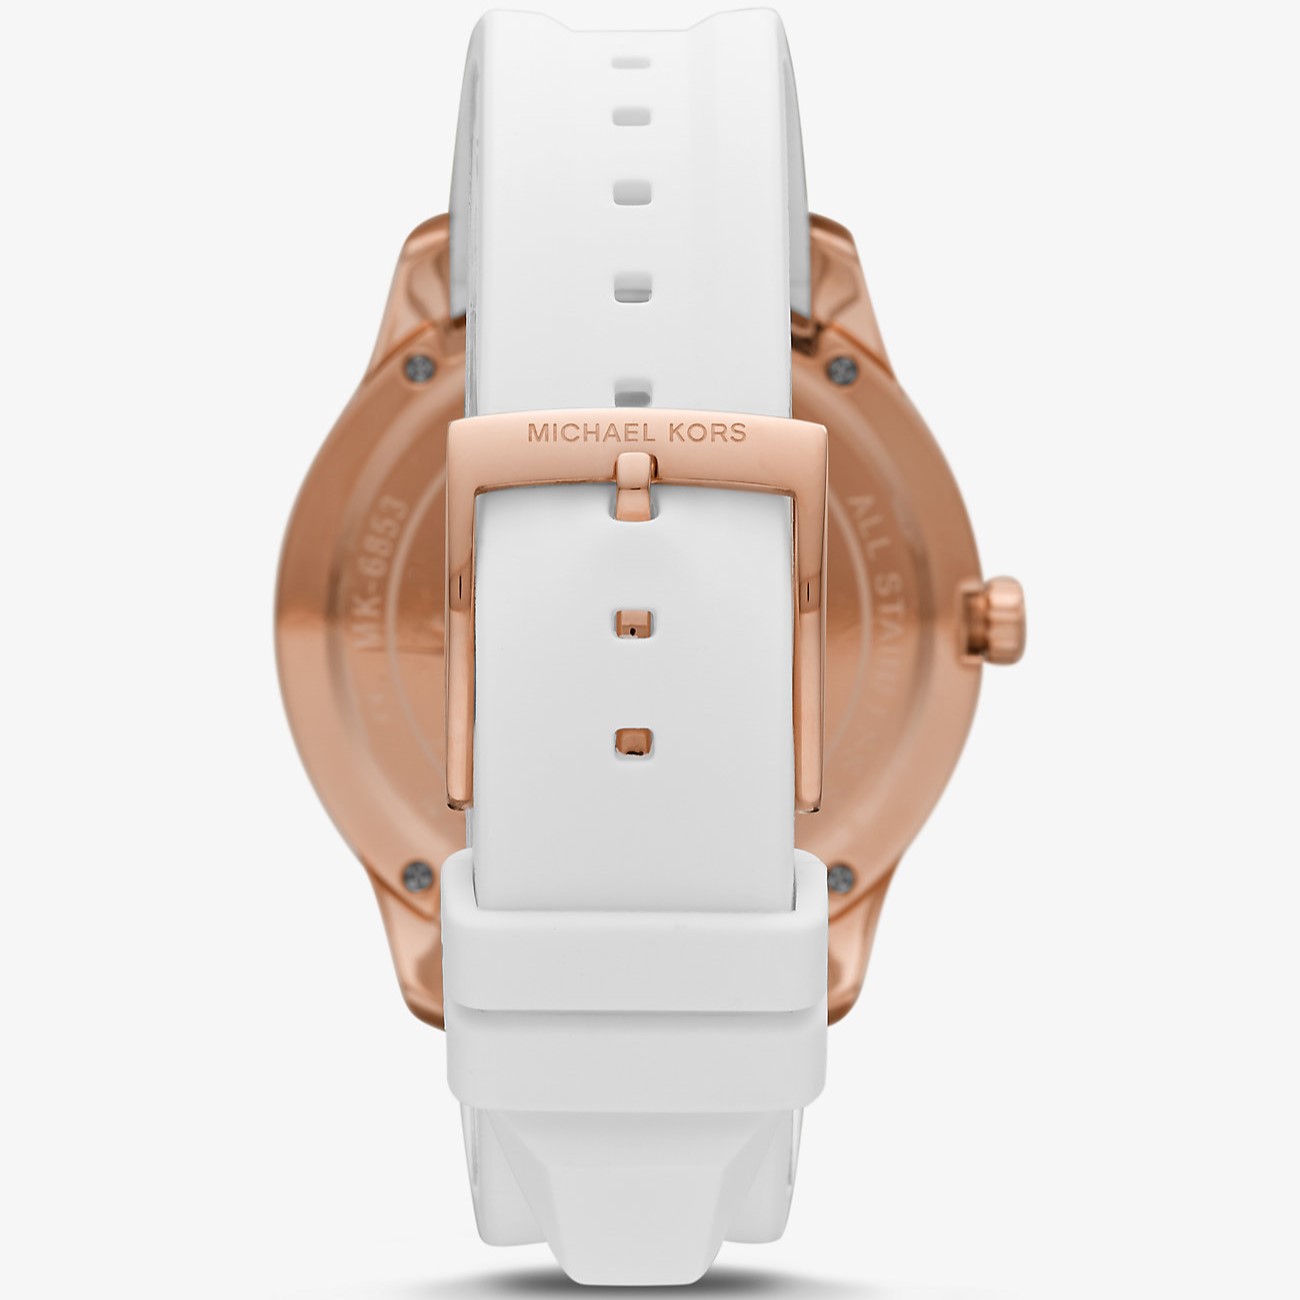 ĐỒNG HỒ ĐEO TAY MICHAEL KORS RUNWAY DIVE OVERSIZED ROSE GOLD-TONE SILICONE STRAP WATCH MK6853 1